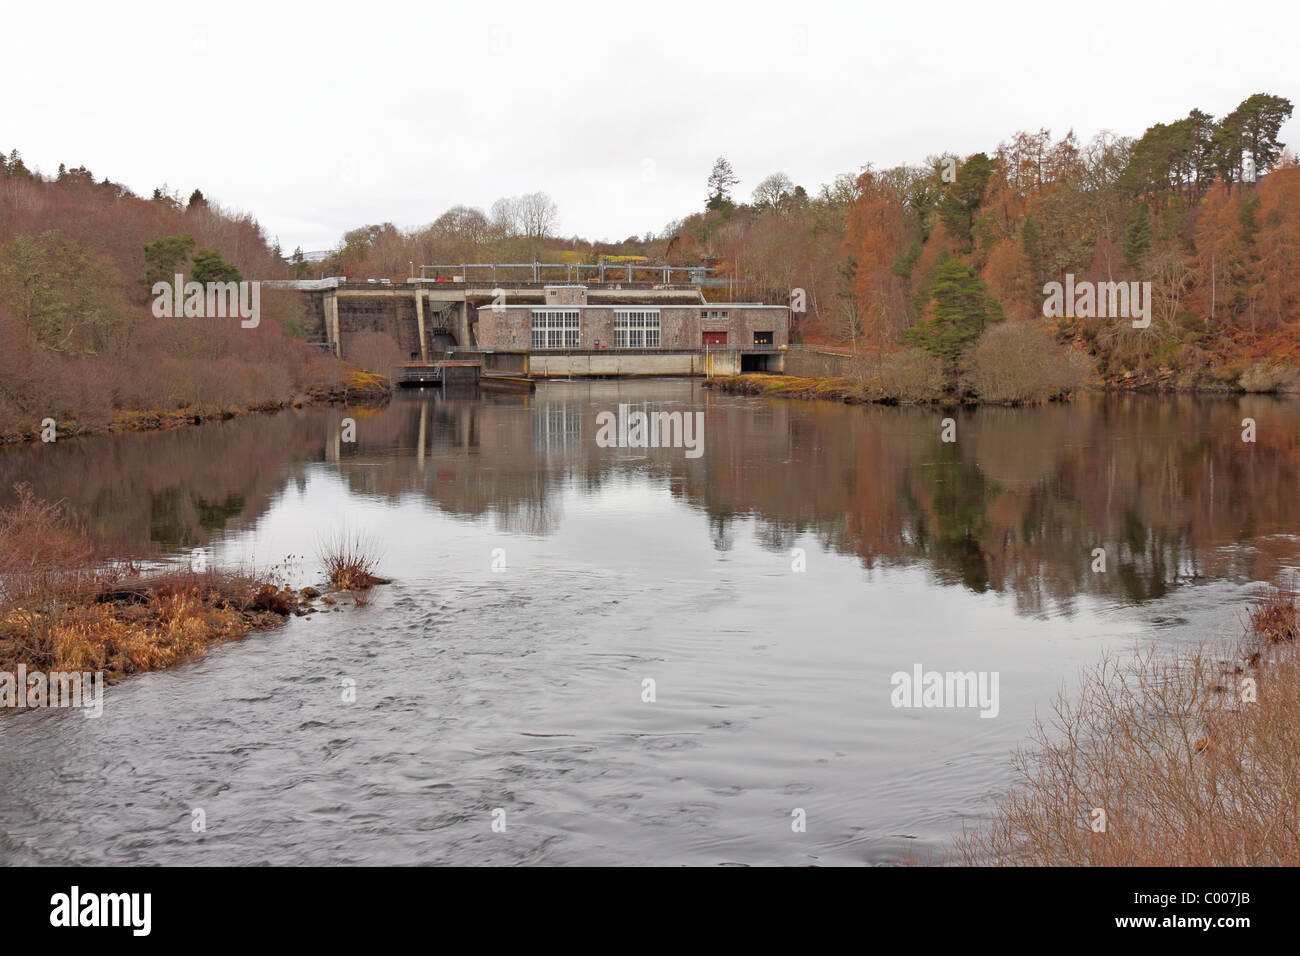 Kilmorack Hydro-Electric Power Station on the River Beauly viewed from downstream Stock Photo